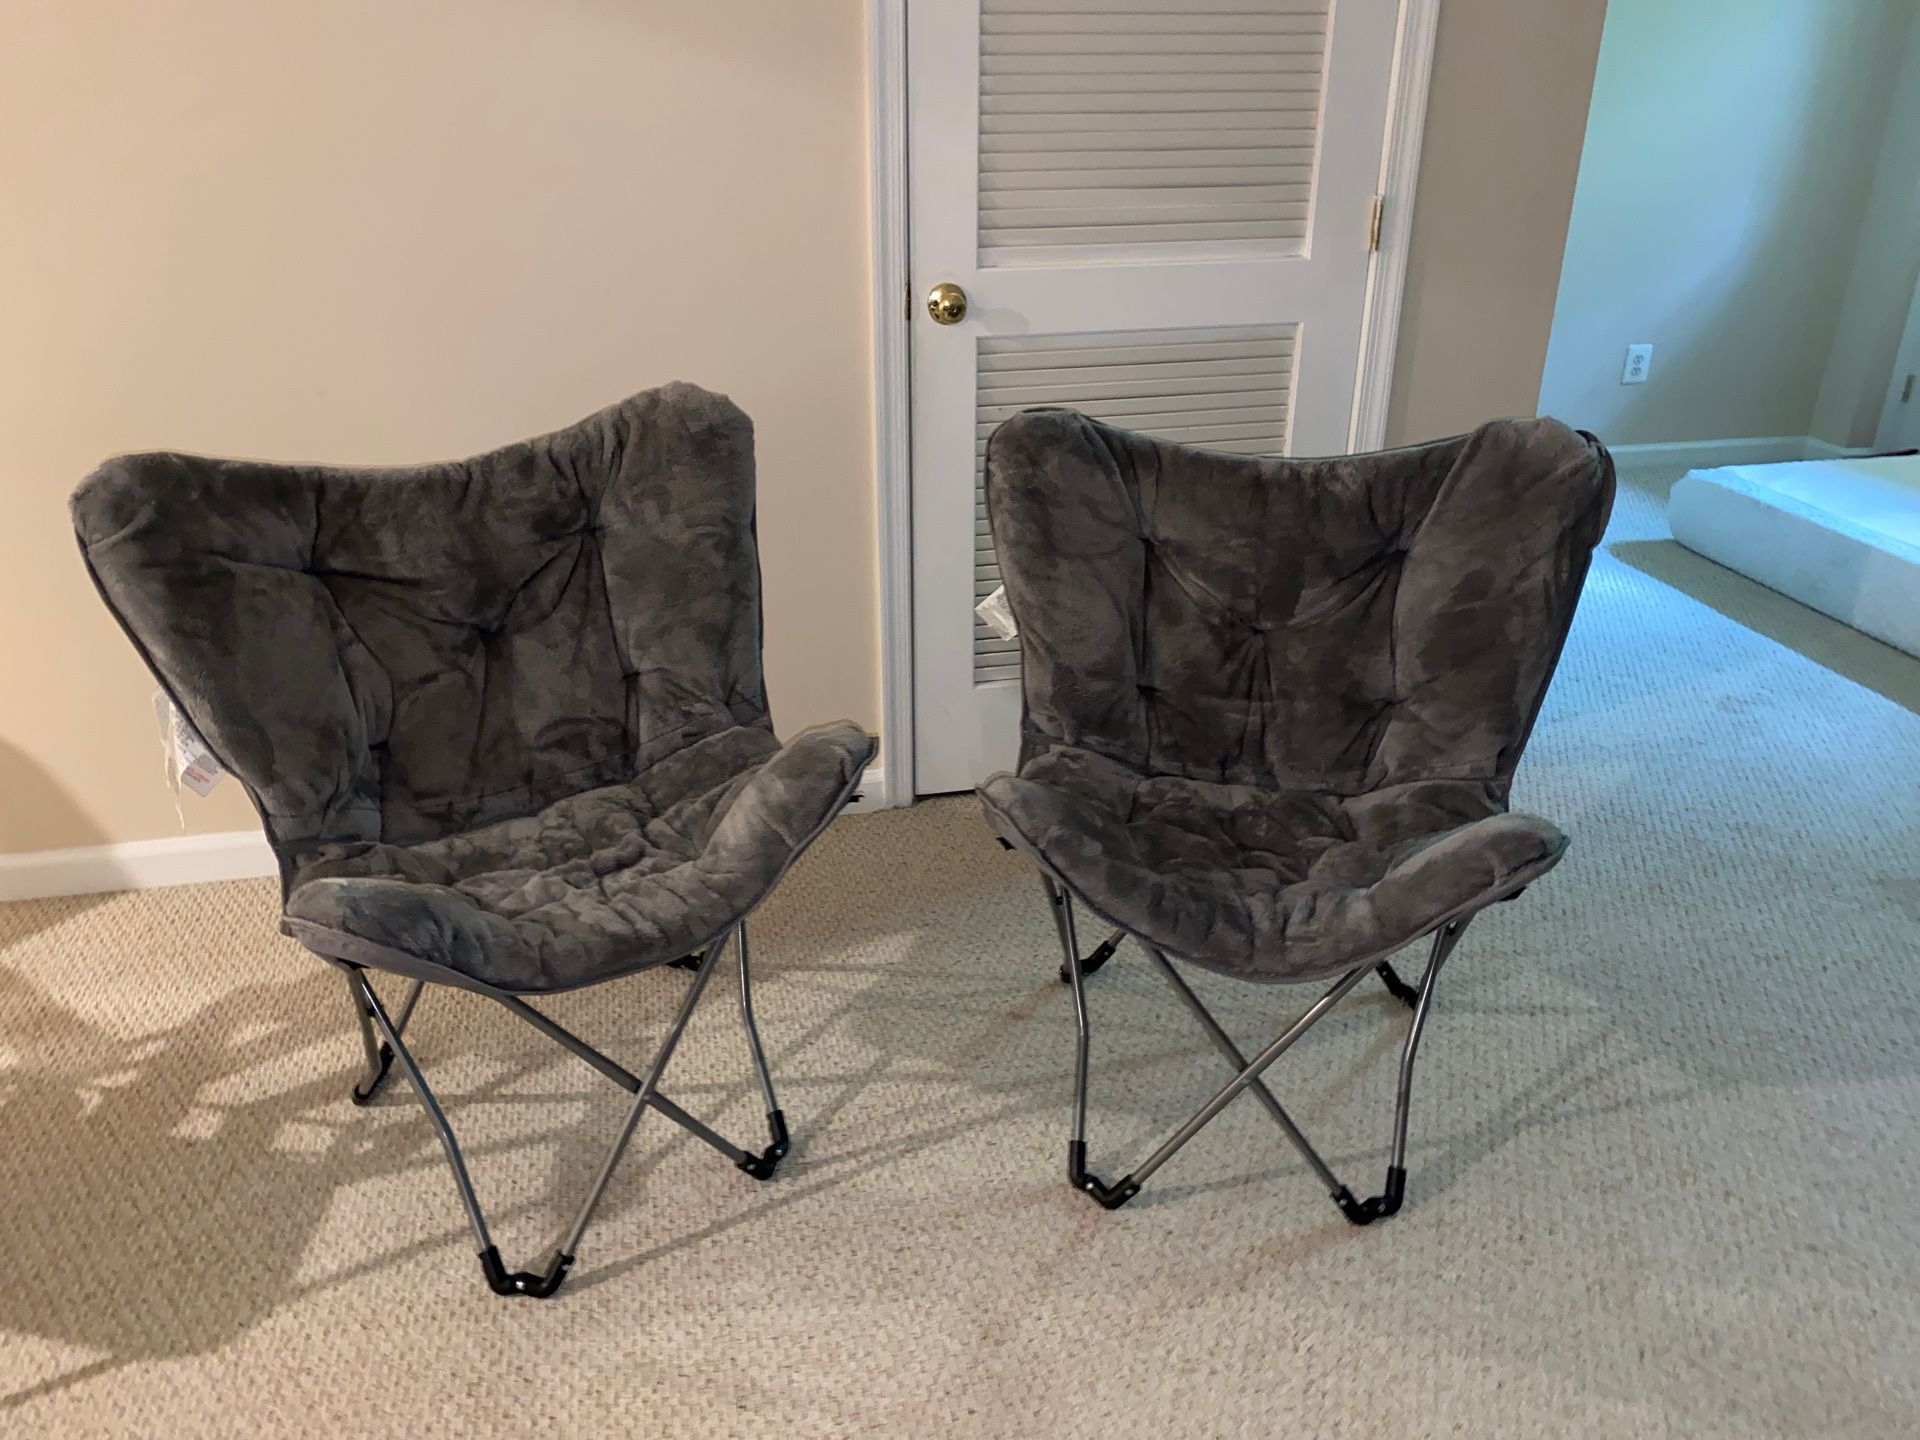 Foldable Clam Chairs